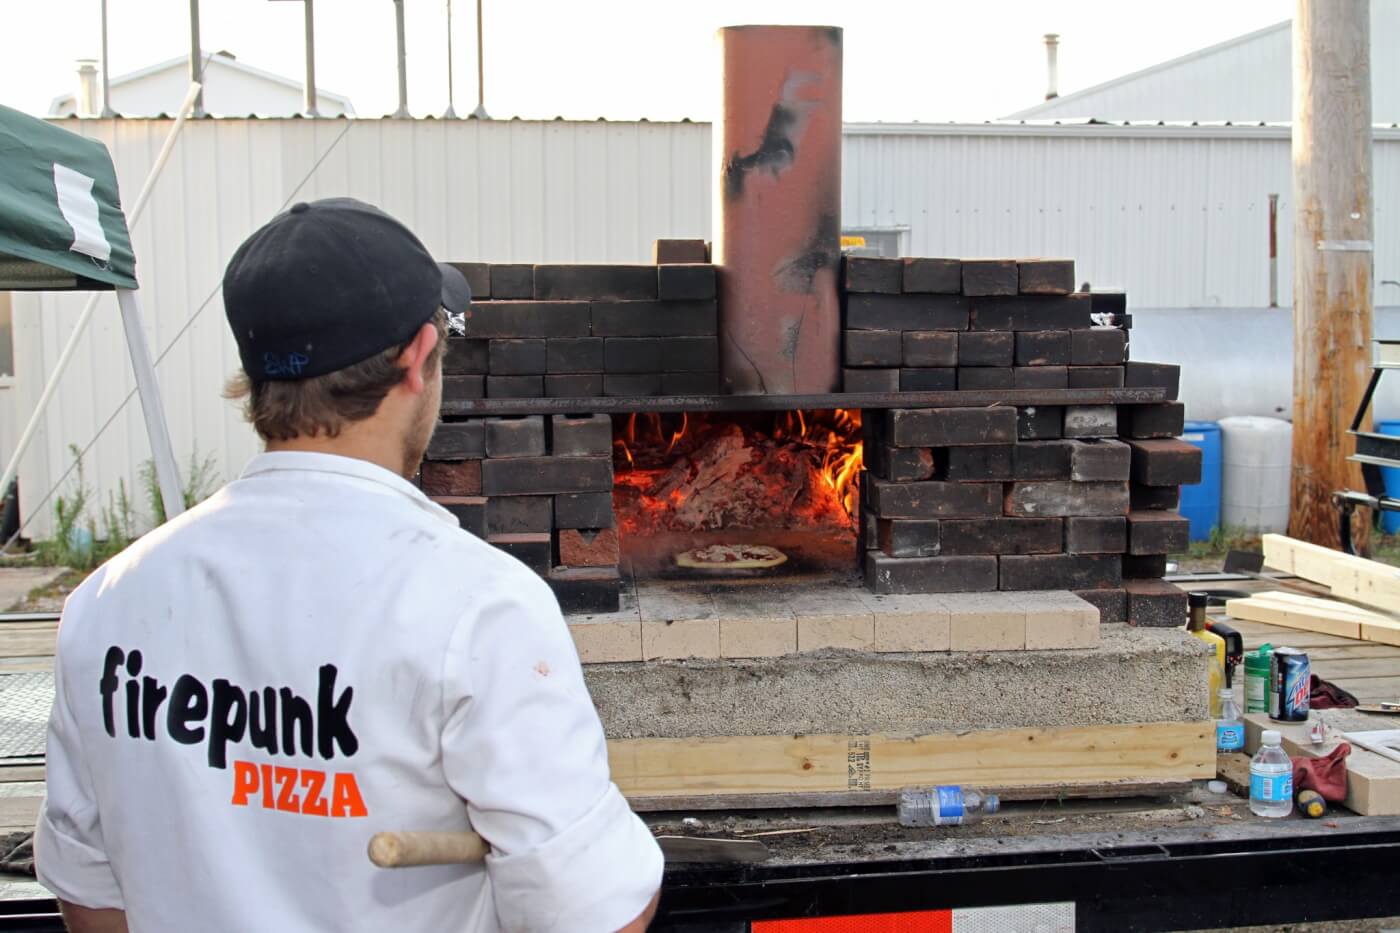 At the Firepunk open house on Sunday attendees were treated to made-to-order brick oven pizzas baked by the famous Firepunk Pizza team.